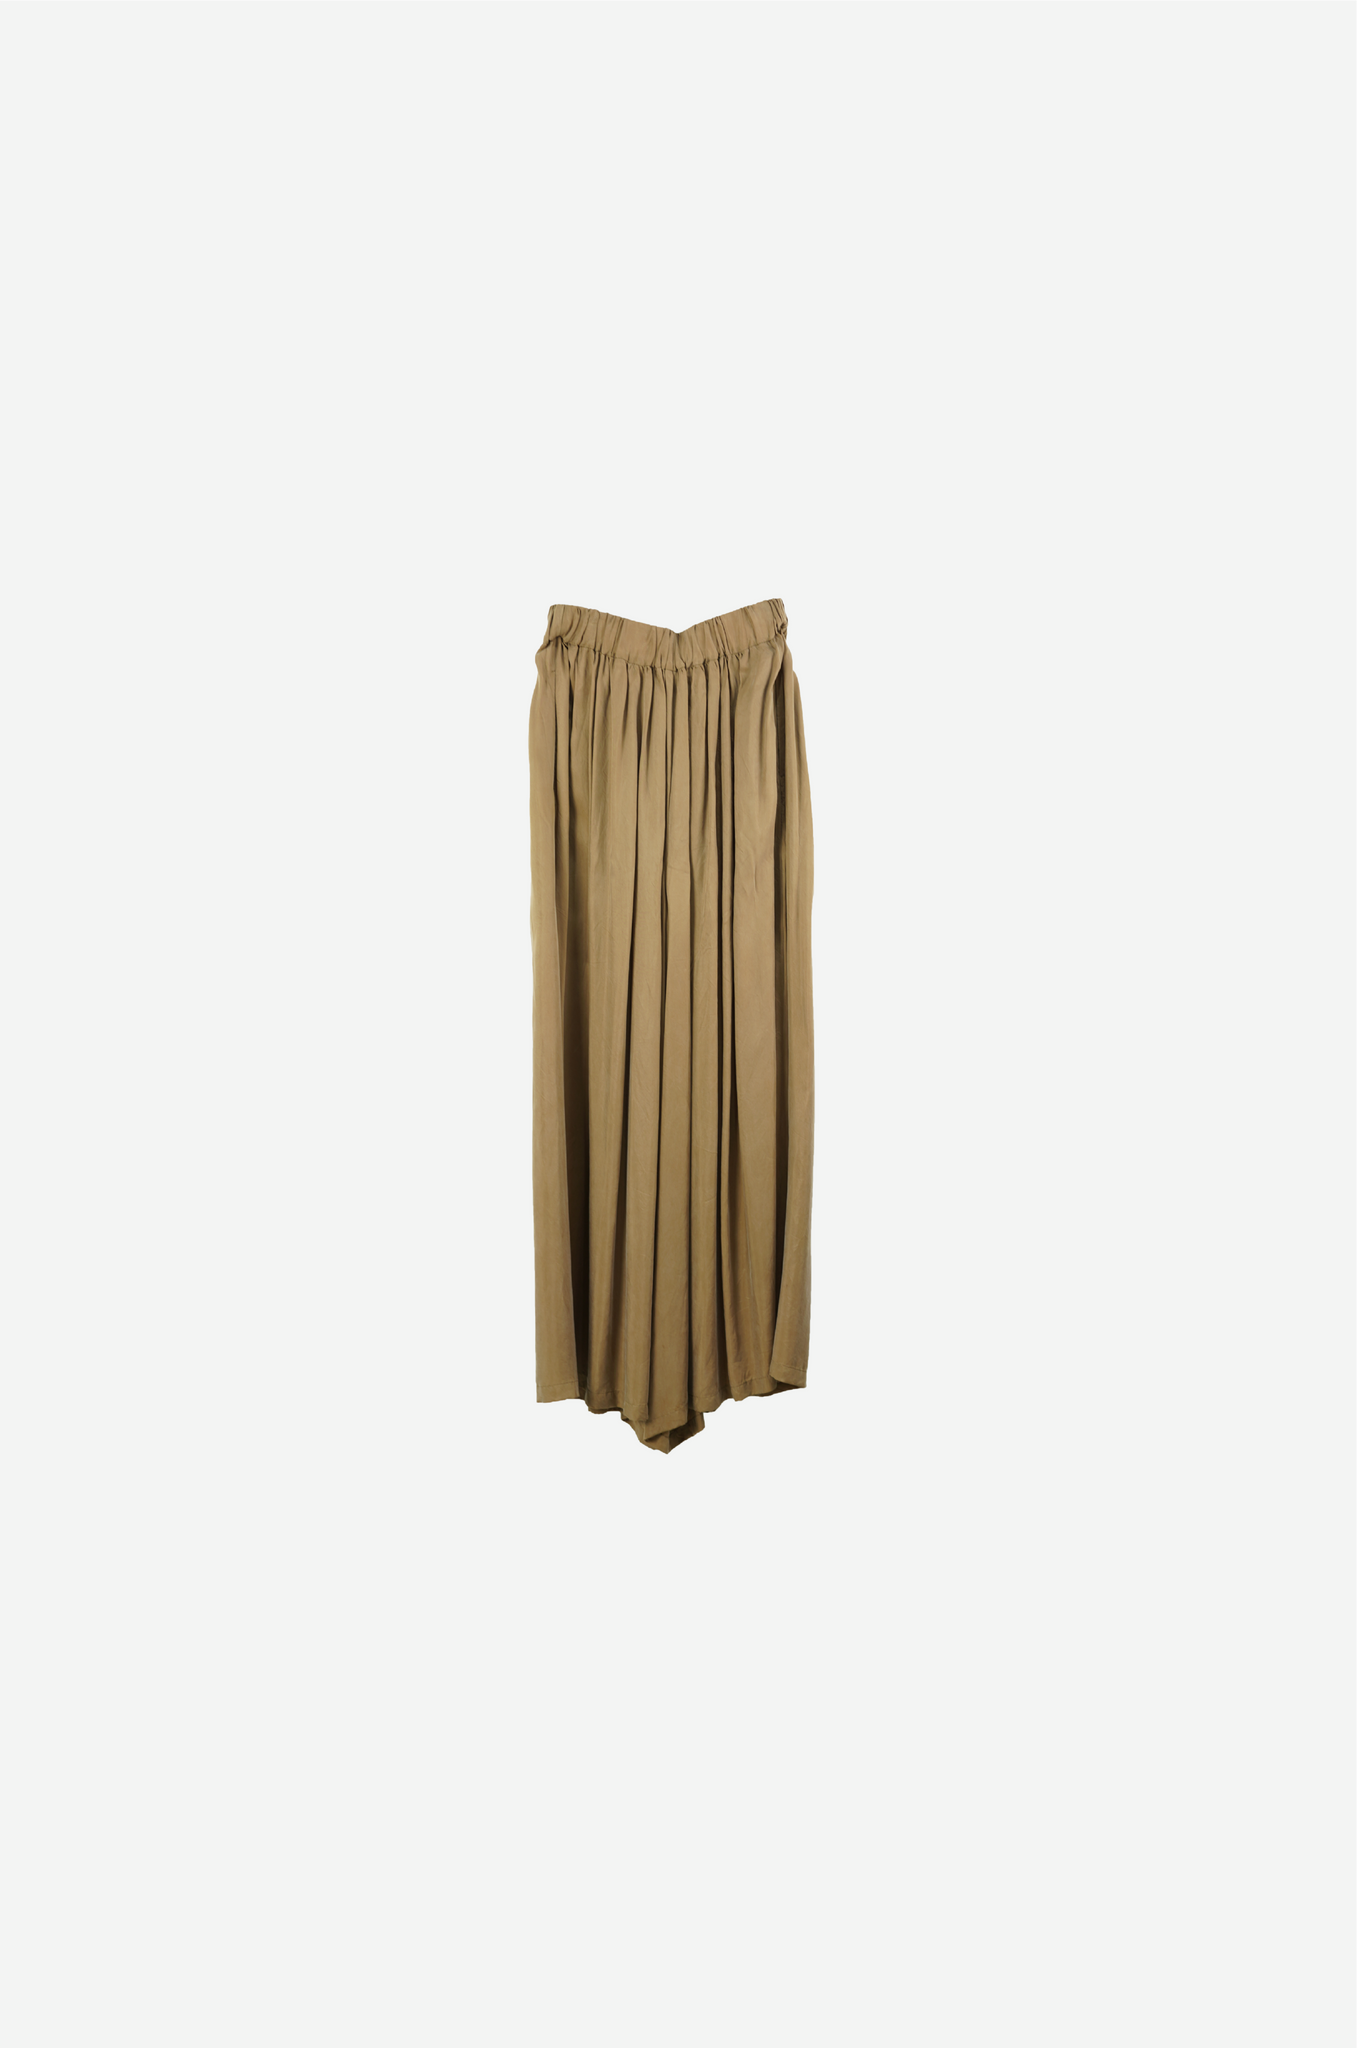 Archives Room: OPENING CEREMONY Pant